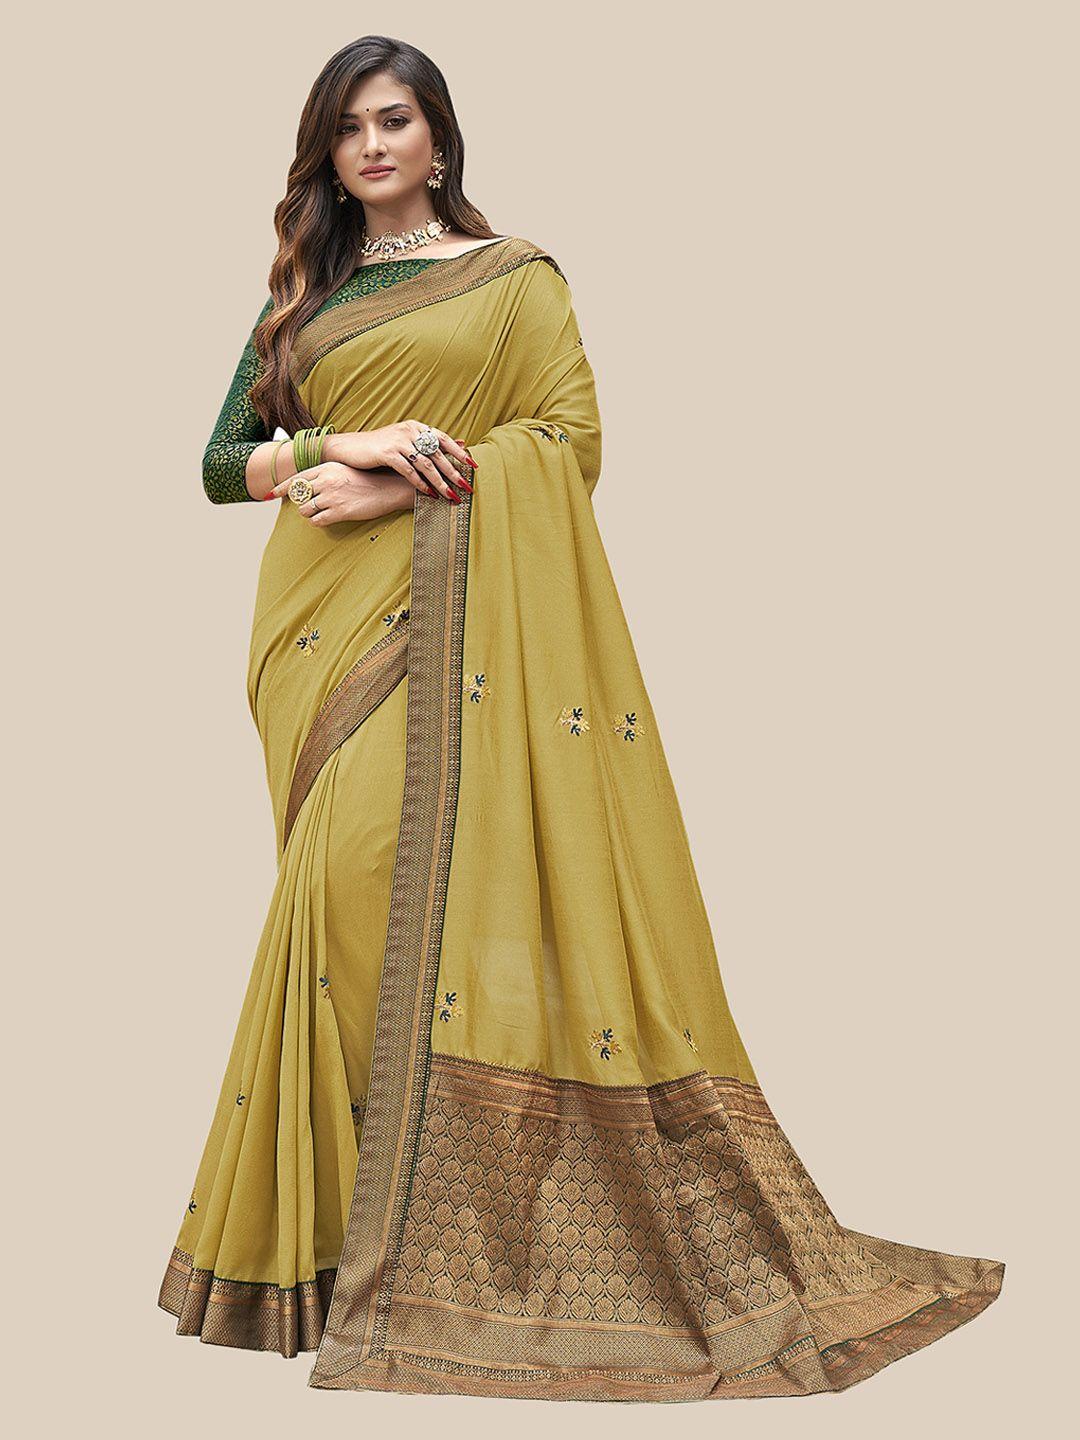 united liberty olive green & gold-toned floral embroidered art silk block print saree